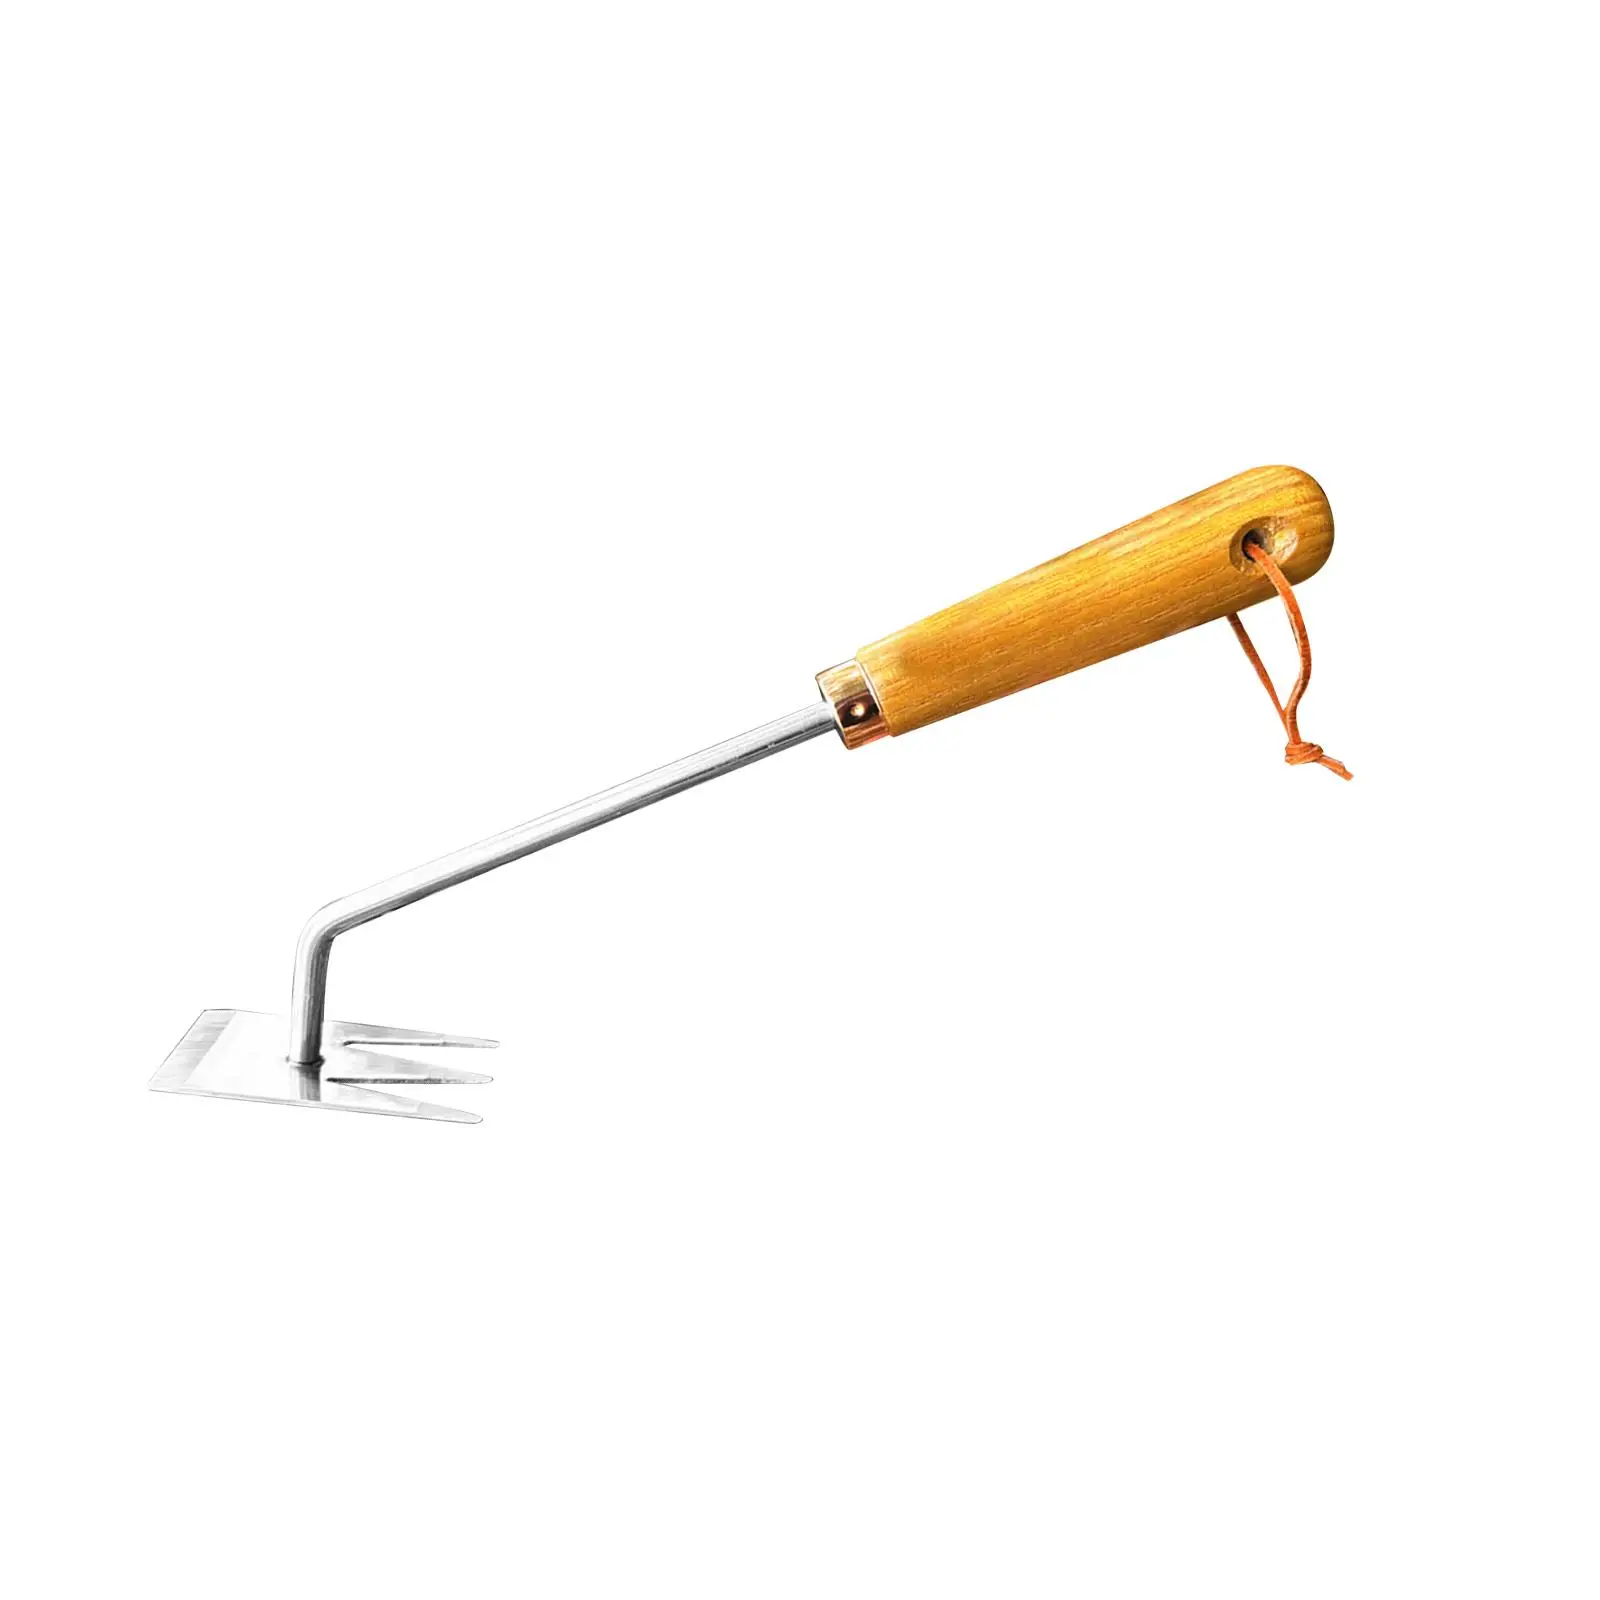 Weeding Tool Cultivating Planting Digging Agricultural Cultivator Portable Hand Weeder for Garden Farm Agriculture Yard Mulching